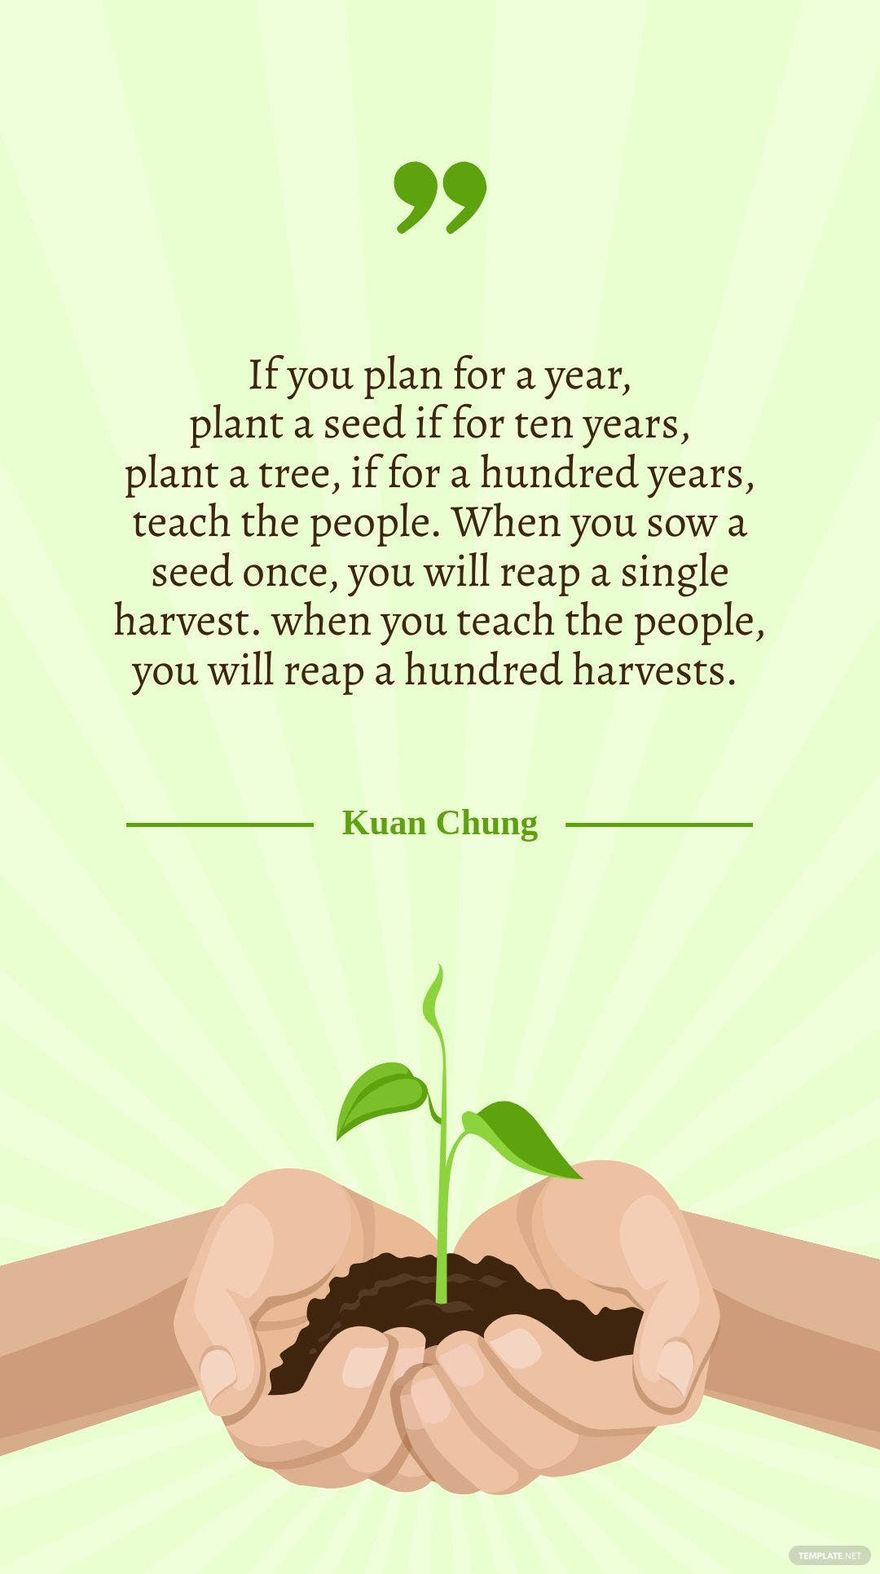 Free Kuan Chung - If you plan for a year, plant a seed if for ten years, plant a tree, if for a hundred years, teach the people. When you sow a seed once, you will reap a single harvest. when you teach the in JPG